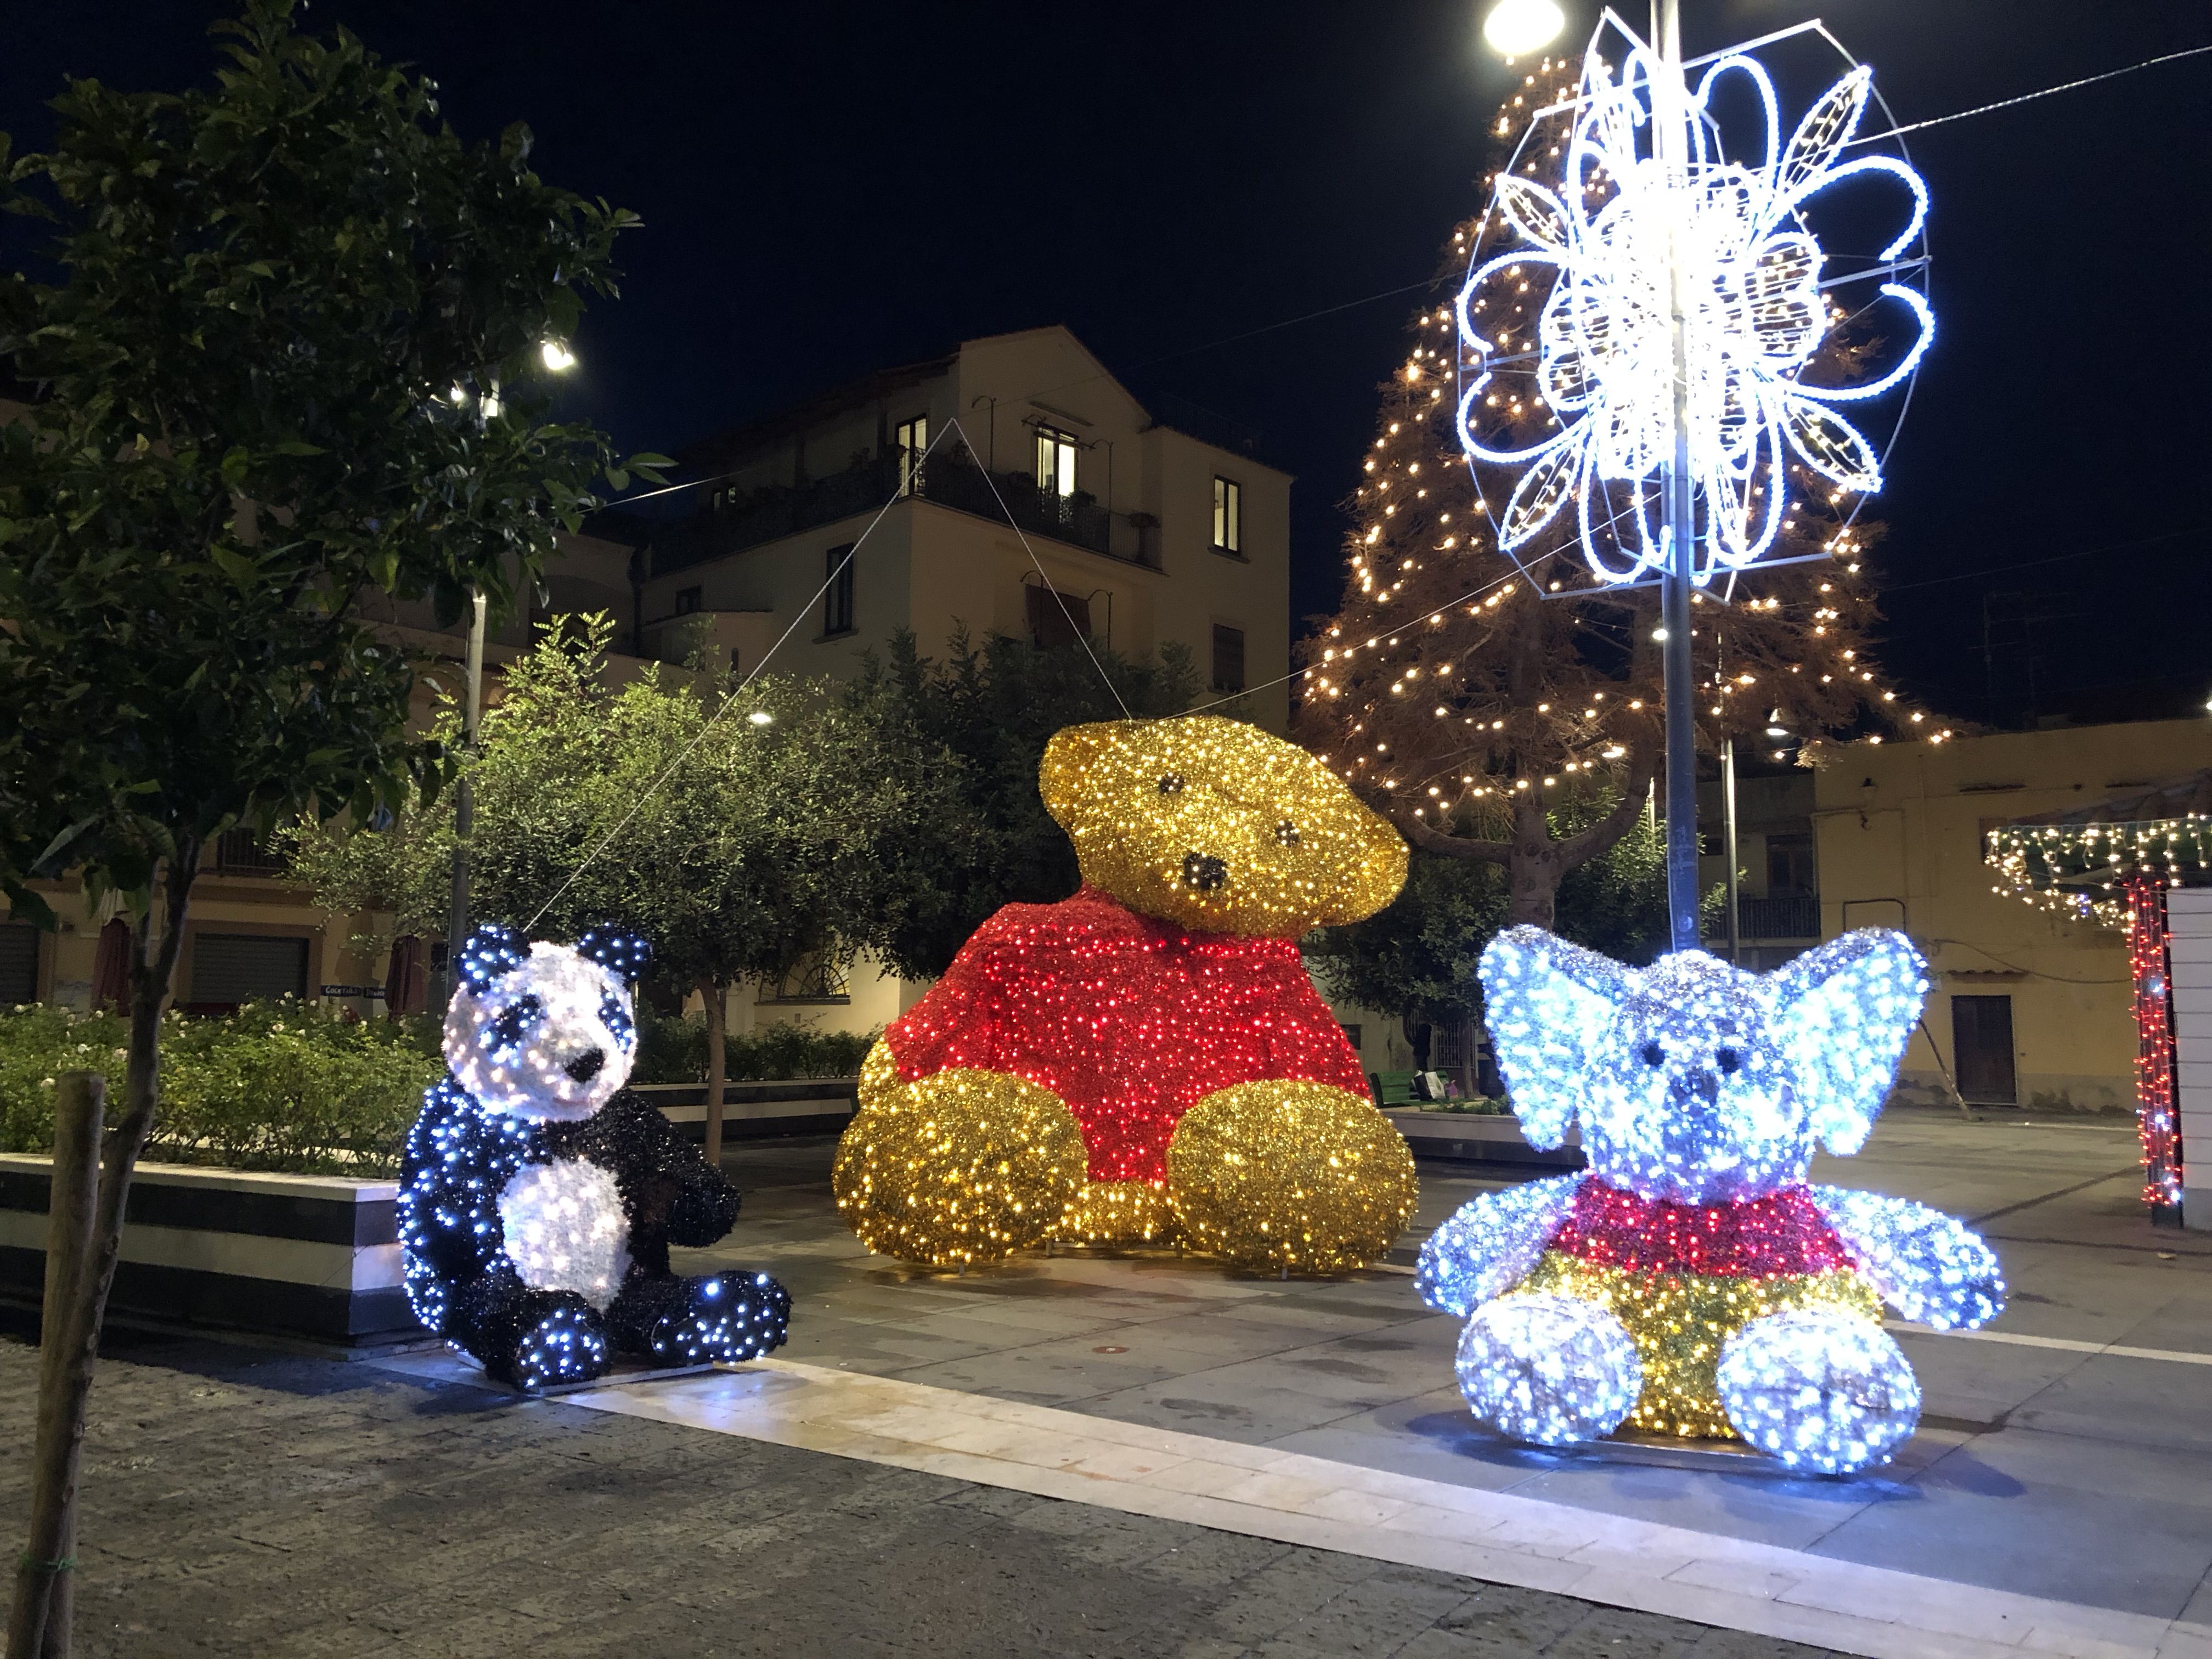 On a wide tiled walkway beside the main road through the centre  of Sorrento, sit three figures studded with Christmas lights,  taller than a person: a toy panda, a teddy bear and an elephant.